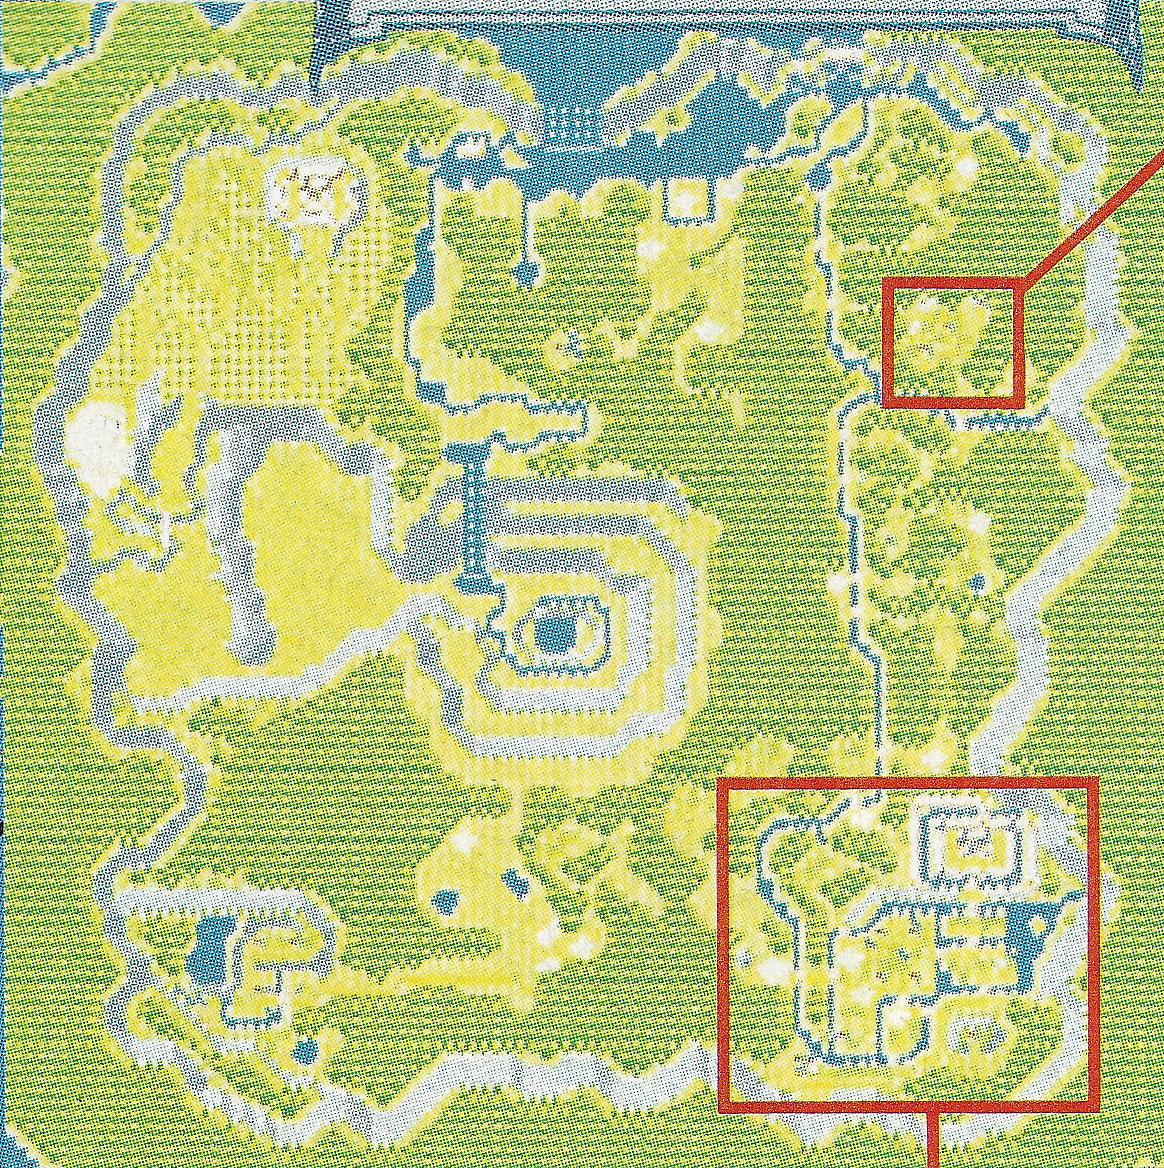 A prerelease map of the Gaia Lowlands from Secret of Mana